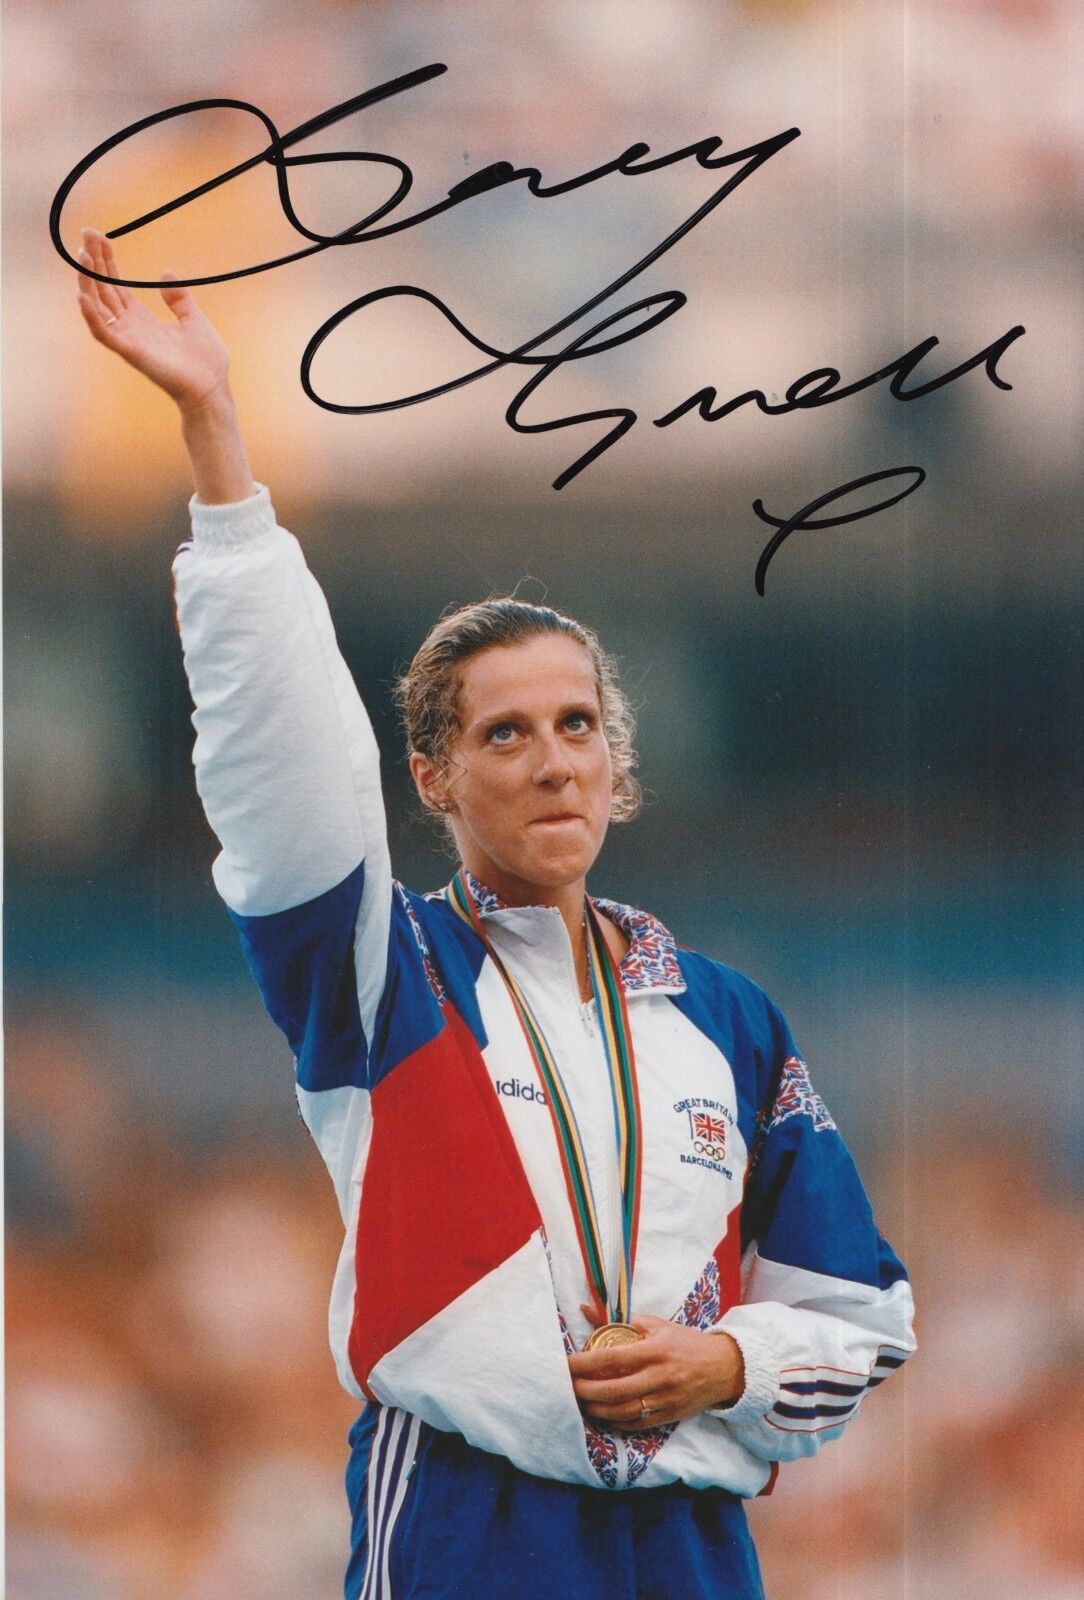 Sally Gunnell Hand Signed Olympics 12x8 Photo Poster painting.